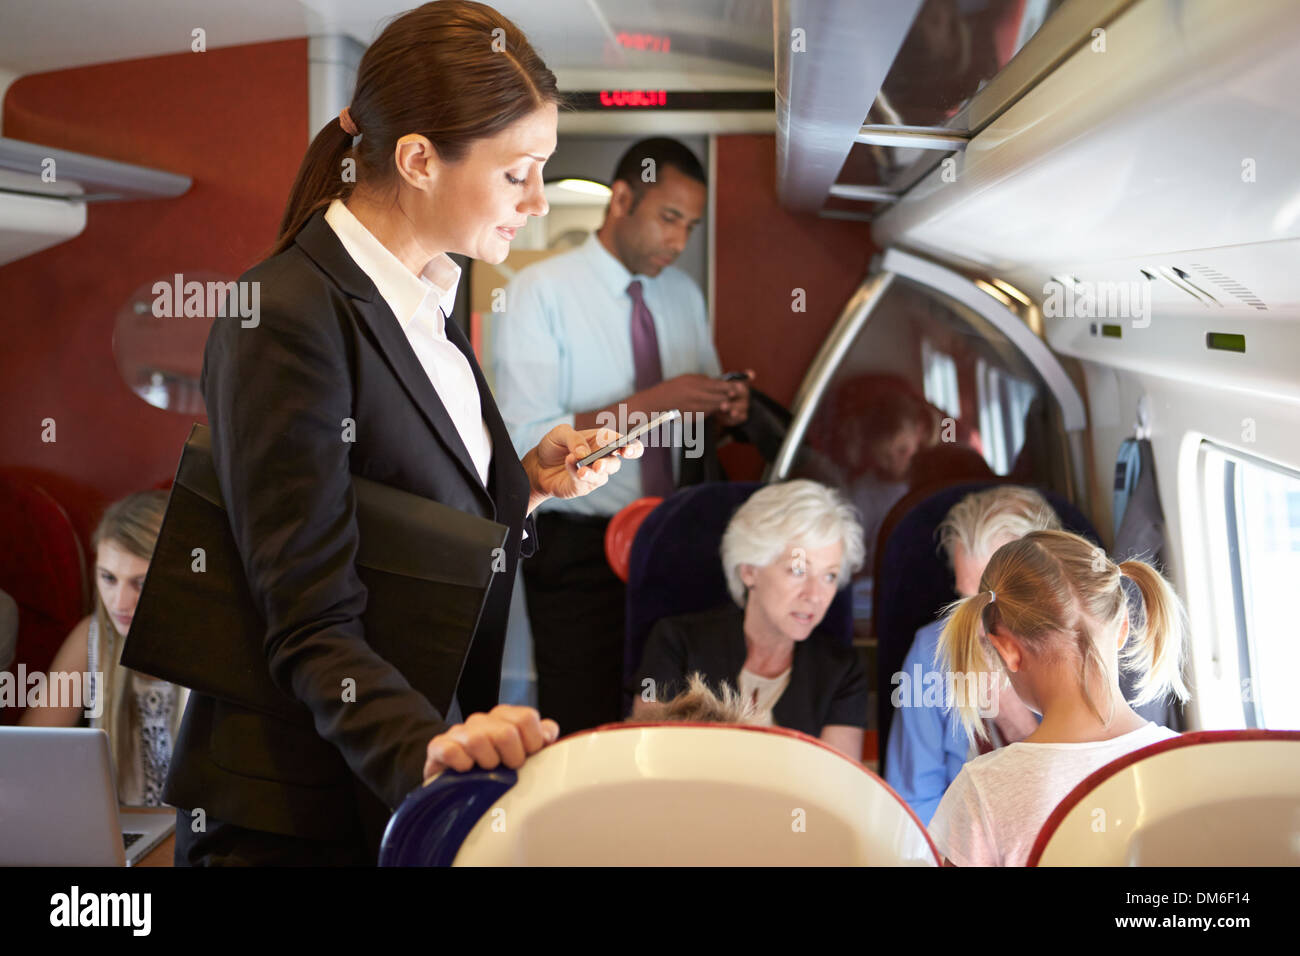 Businesswoman Using Mobile Phone On Busy Commuter Train Stock Photo